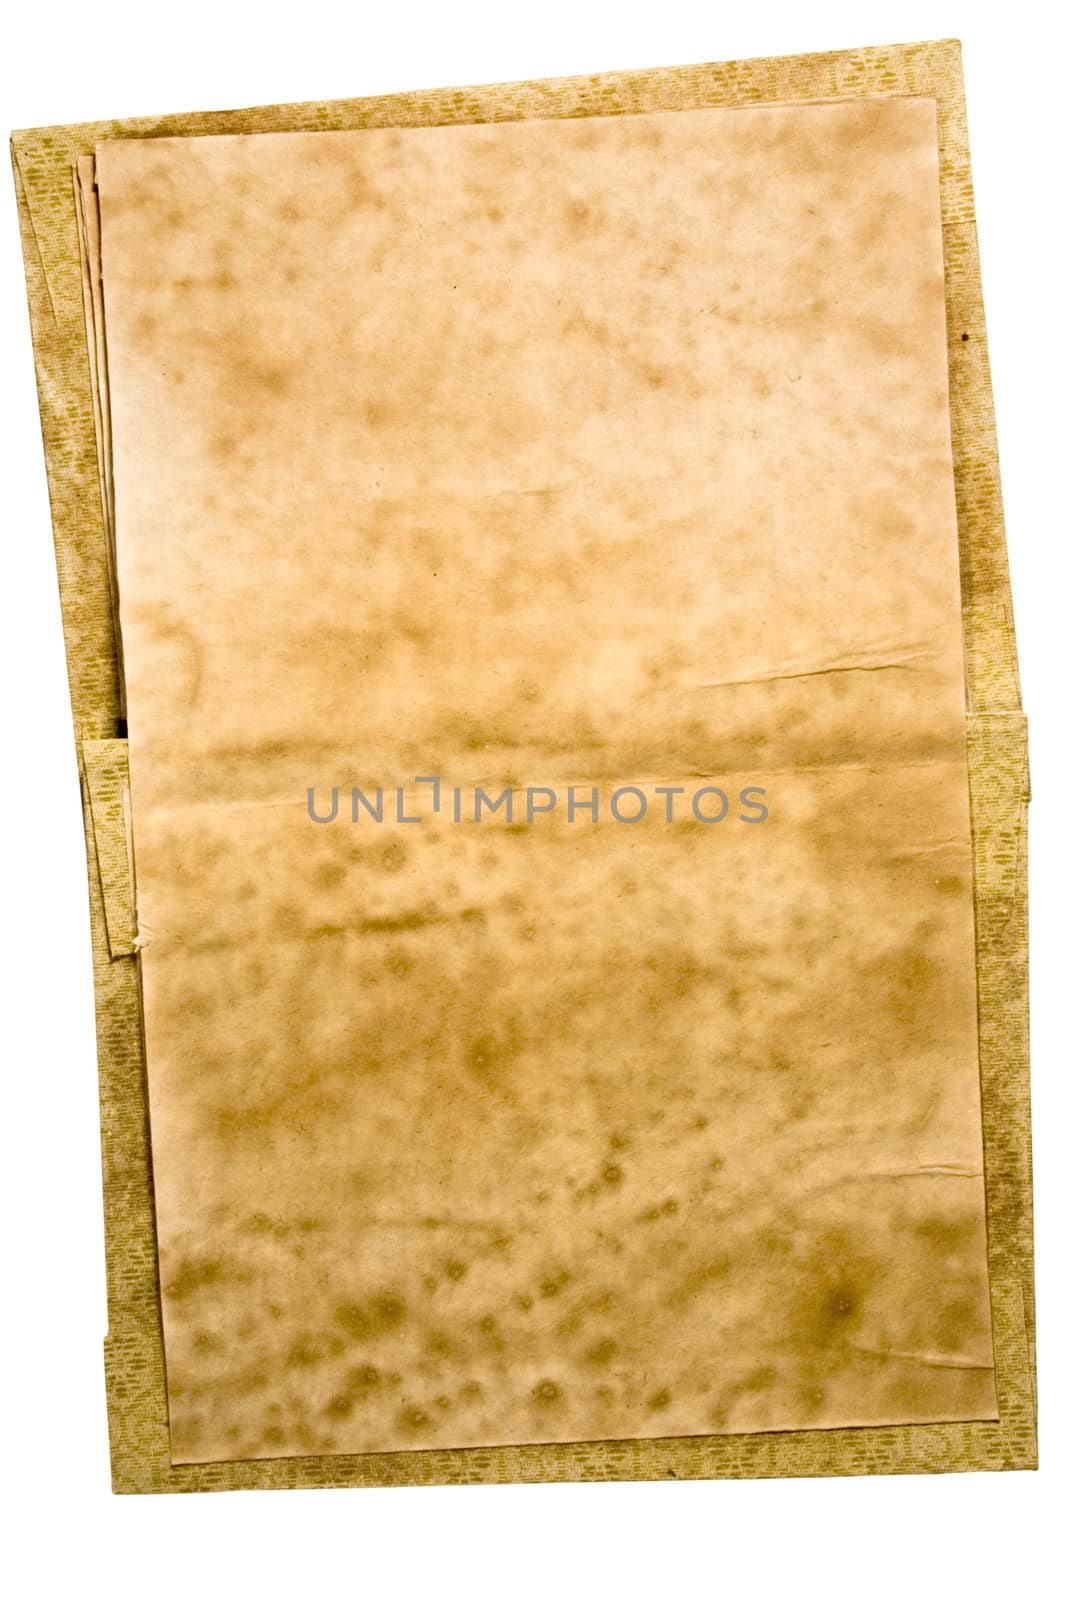 Stained Old Book with Clipping Path by winterling